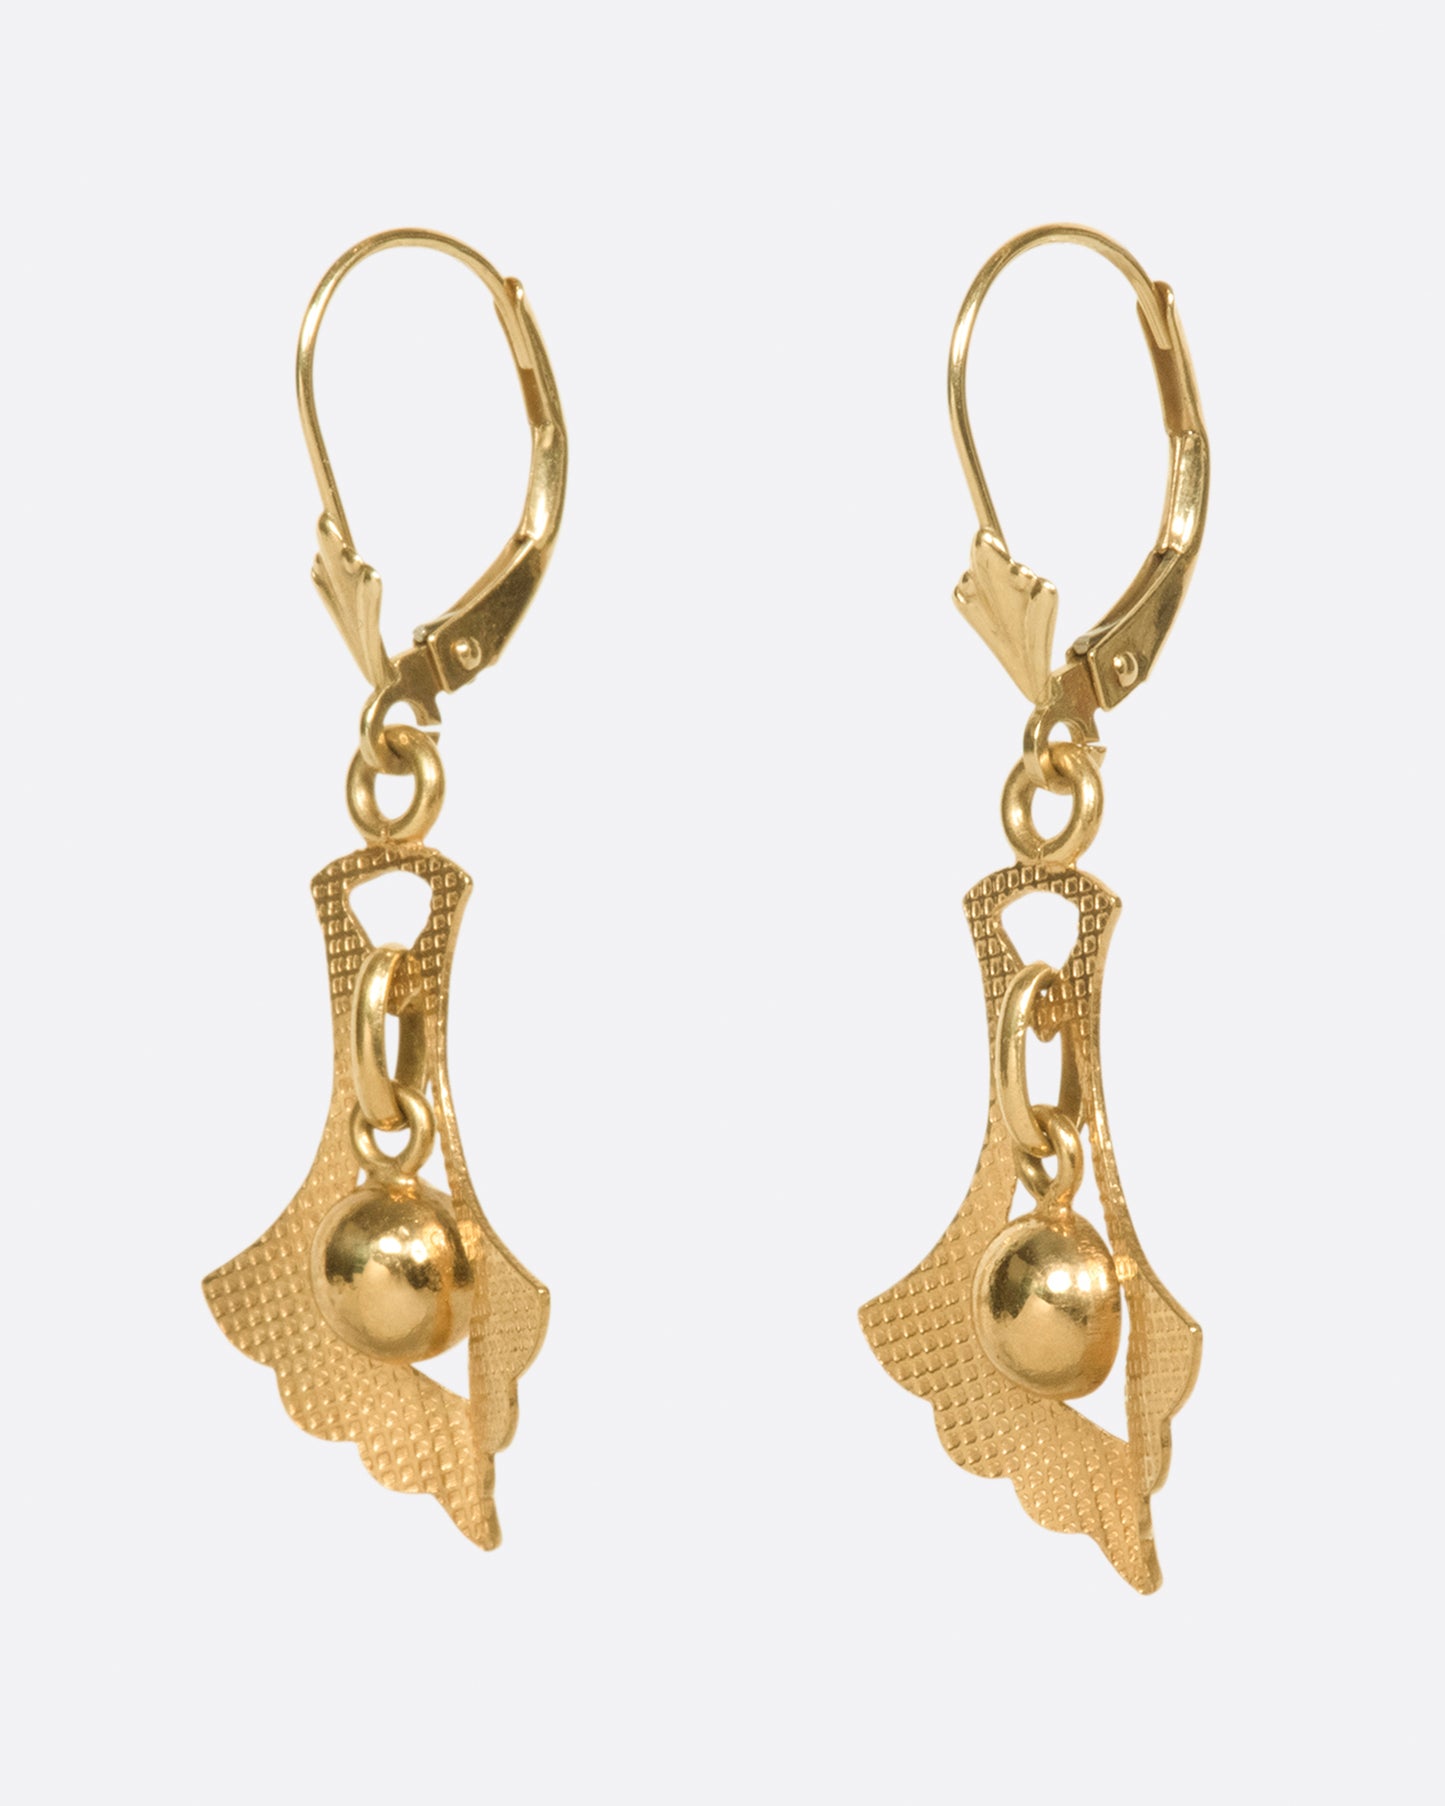 A pair of leverback earrings whose drops have great motion and sparkle just enough in the sun.